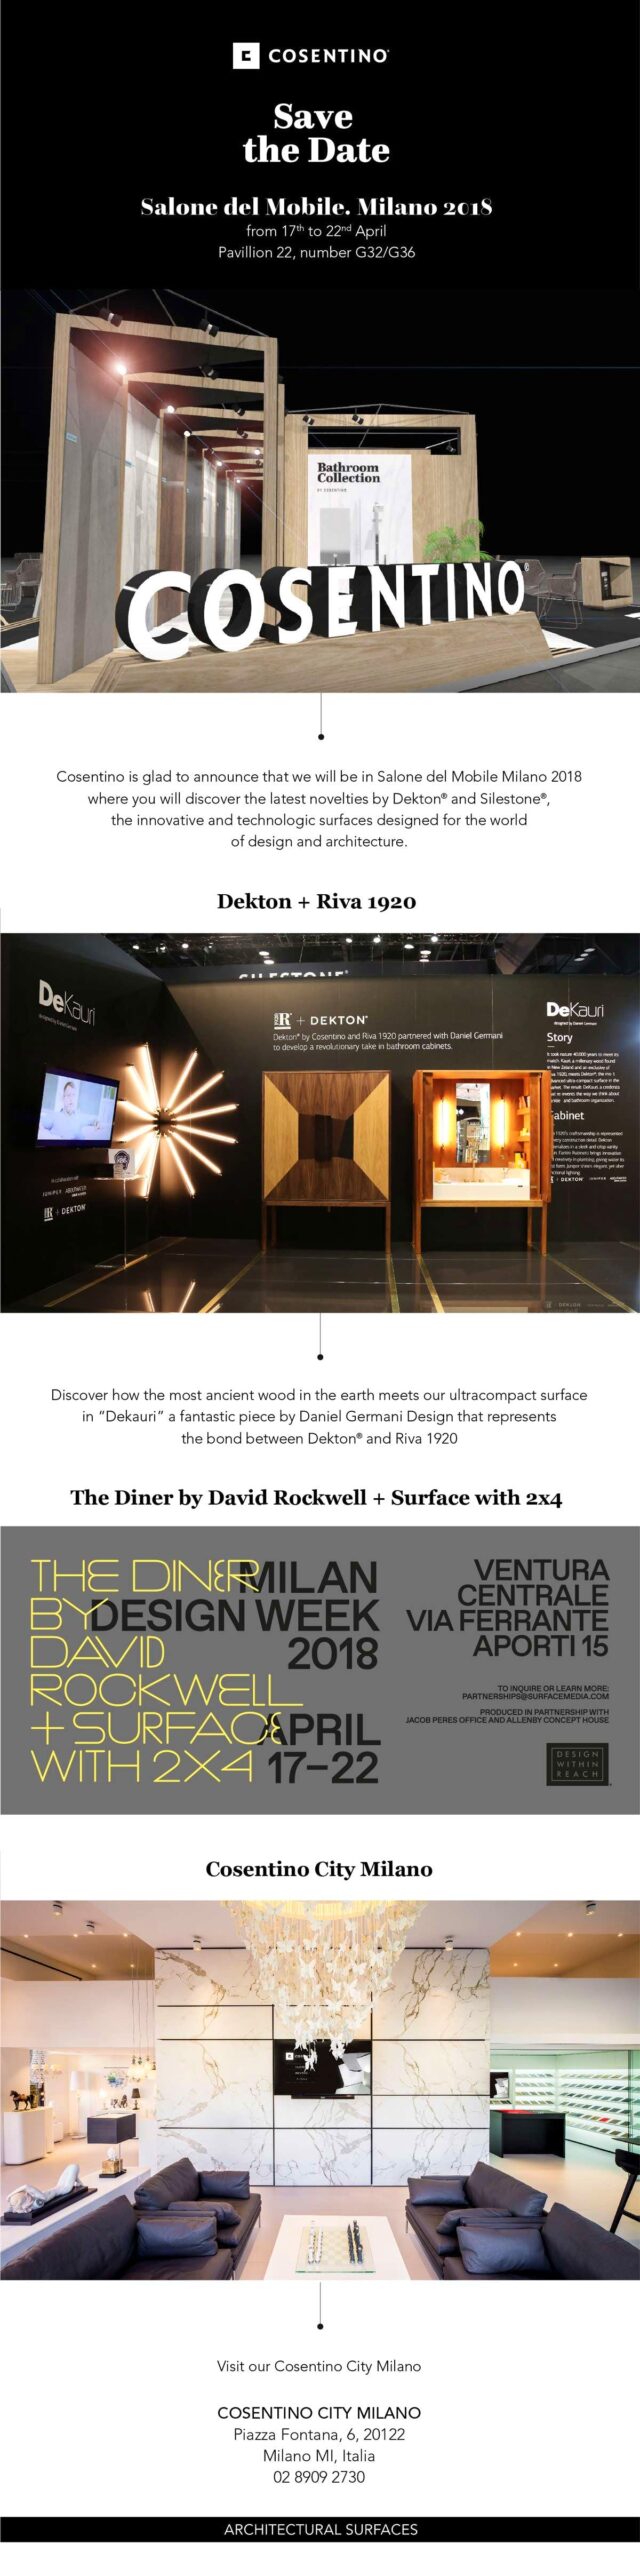 Image of Cosentino Save the Date Milan Design Week 18 2 1 6 scaled in Cosentino's C Magazine is Honoured with the German Silver Architect's Darling Award 2017 - Cosentino